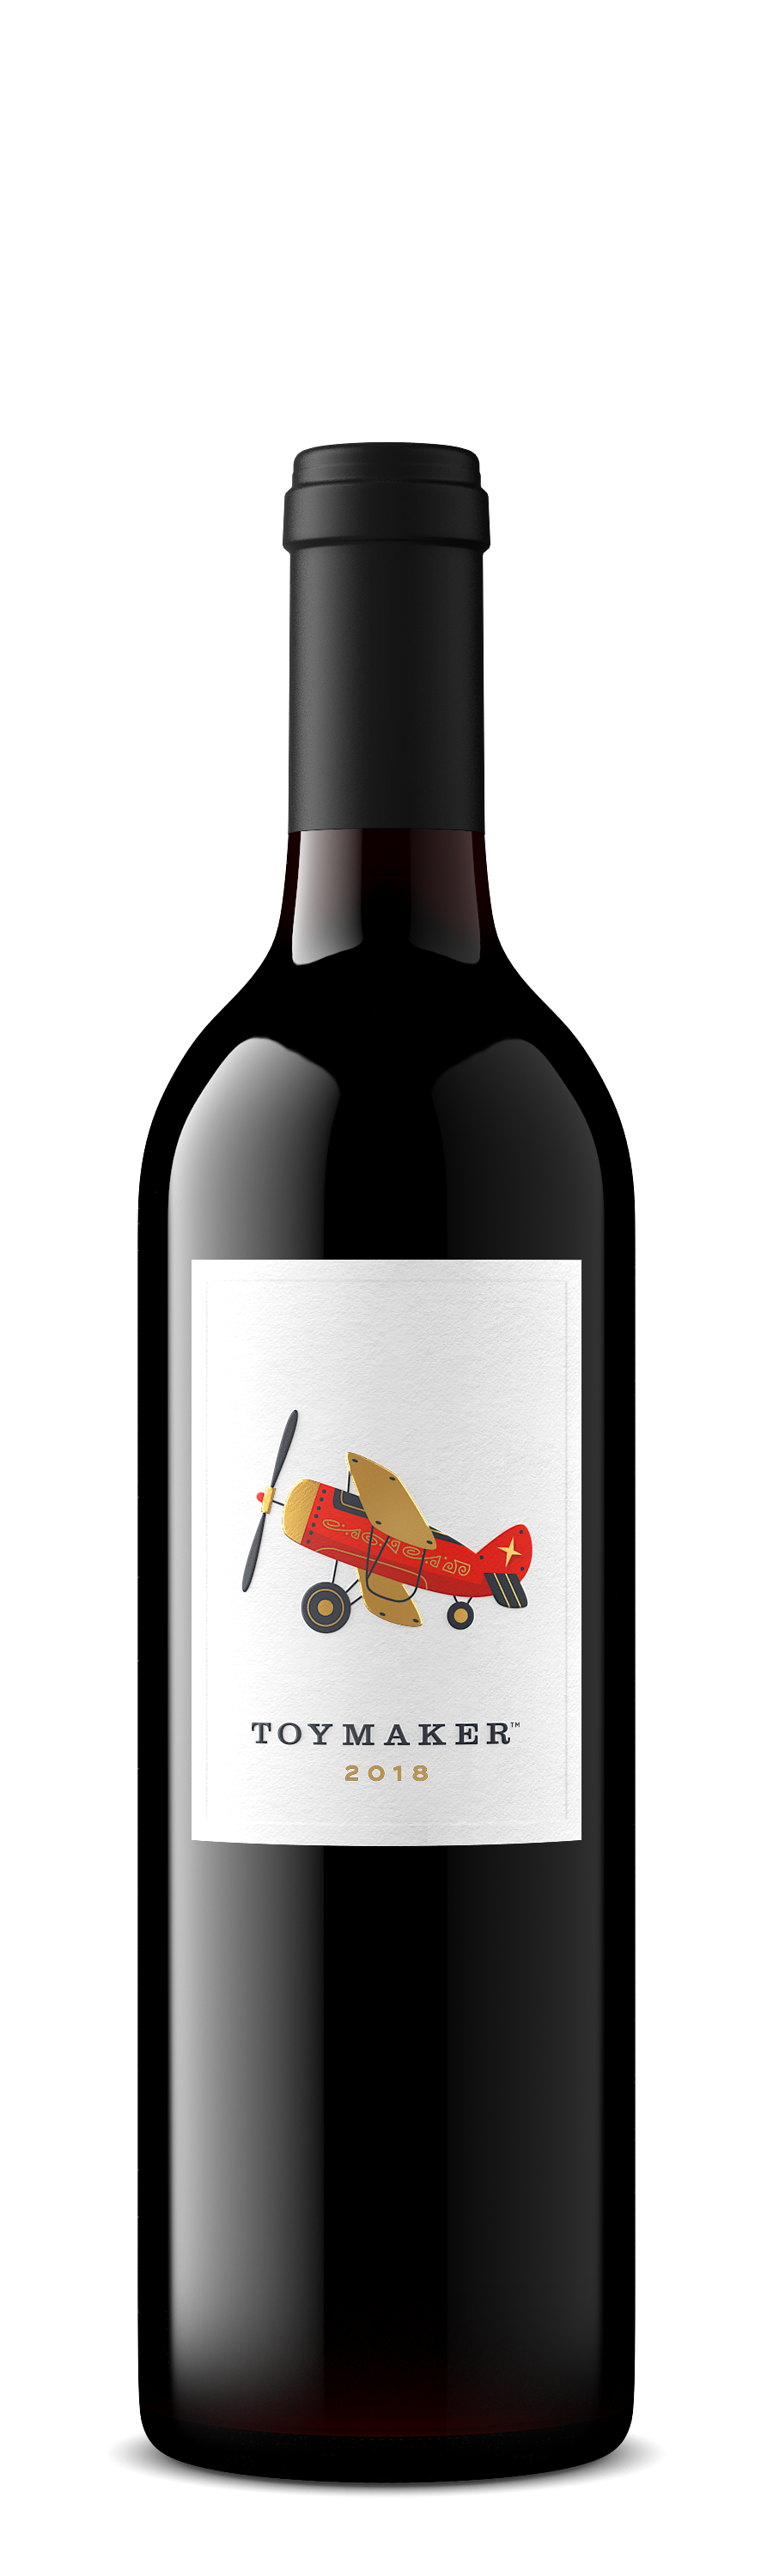 2017 ToyMaker Cellars Cabernet Sauvignon, Red Wine, Napa Valley, California, made by winemaker Martha McClellan of Sloan Estate, Checkerboard Vineyards, Levy & McClellan, and formerly of Harlan Estate. Best Napa Valley Grand Cru red wines.